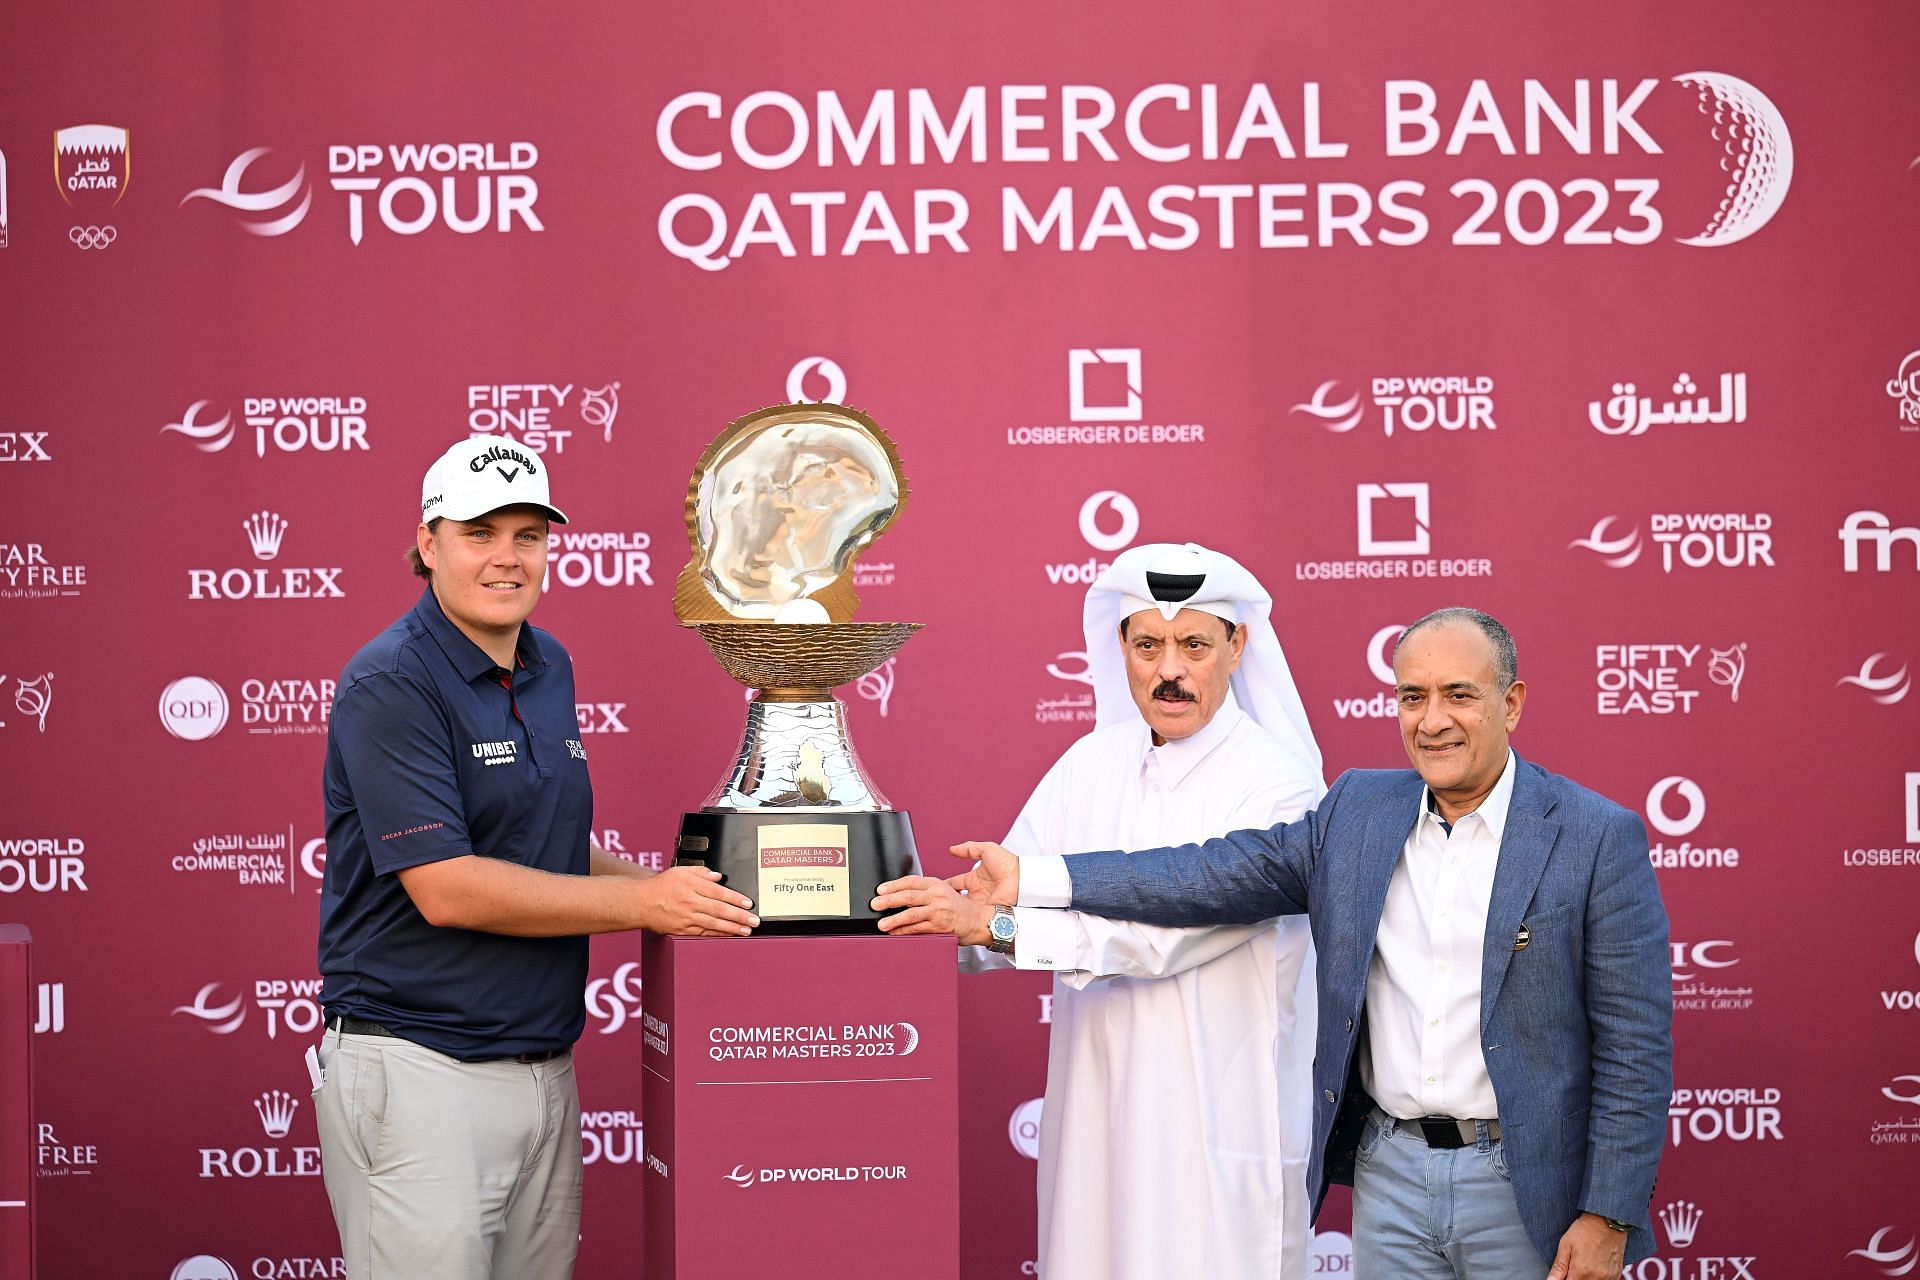 Commercial Bank Qatar Masters 2023 (Image via Getty)